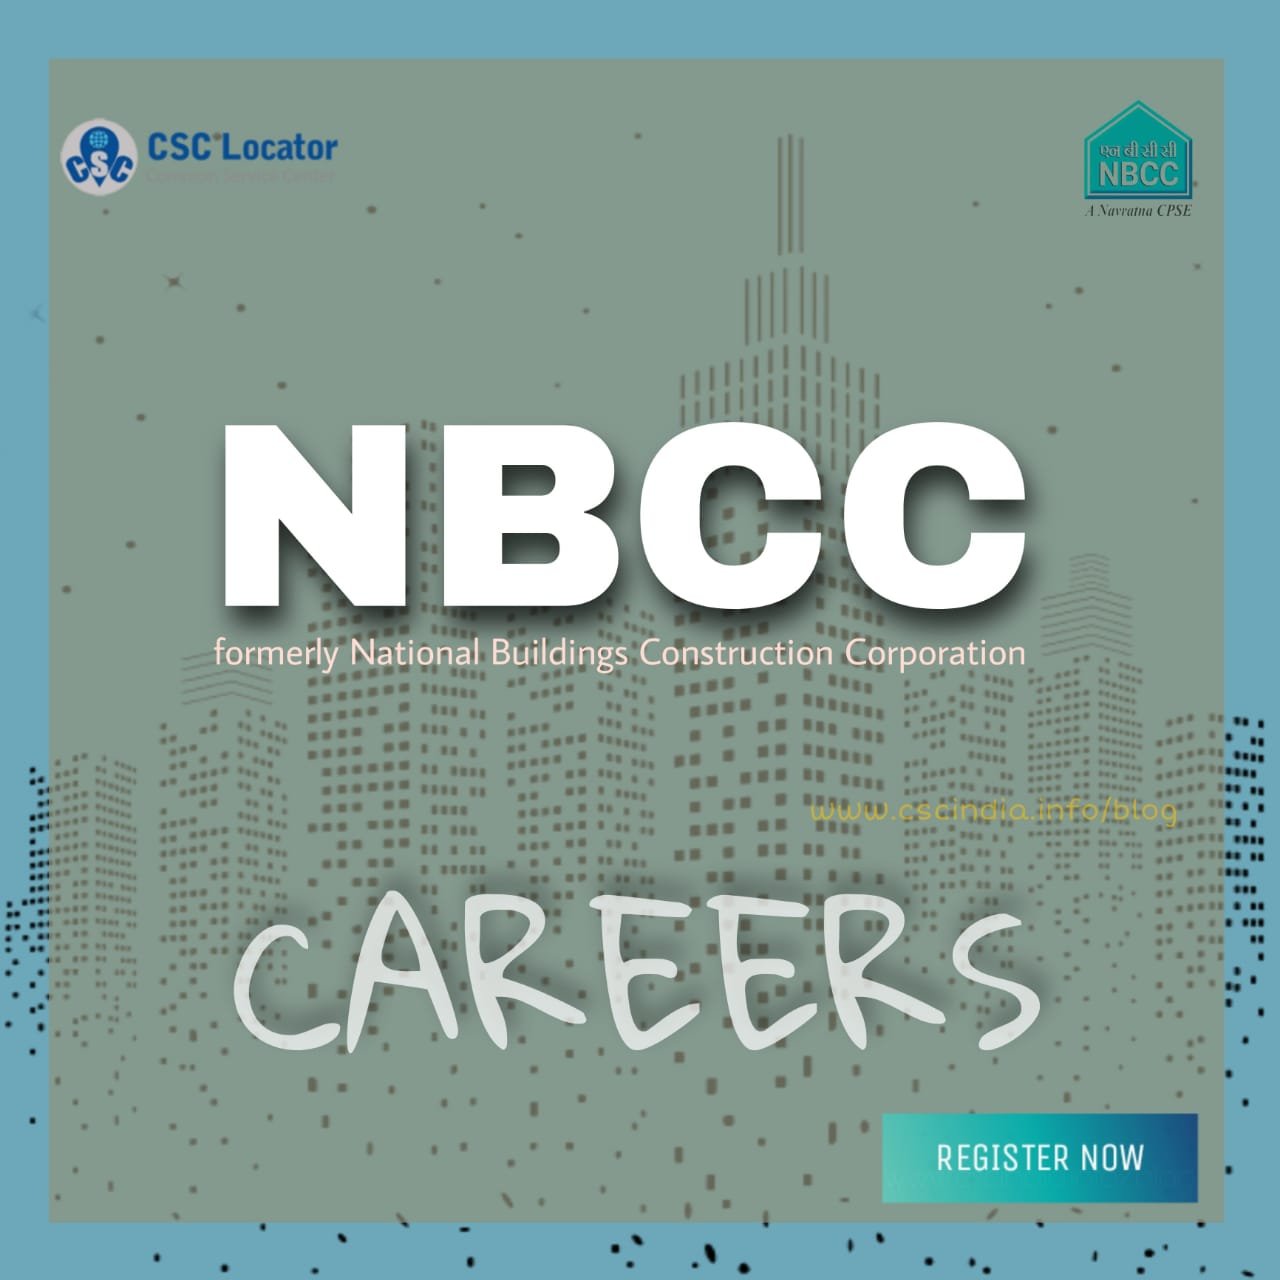 NBCC (India) Limited invites application